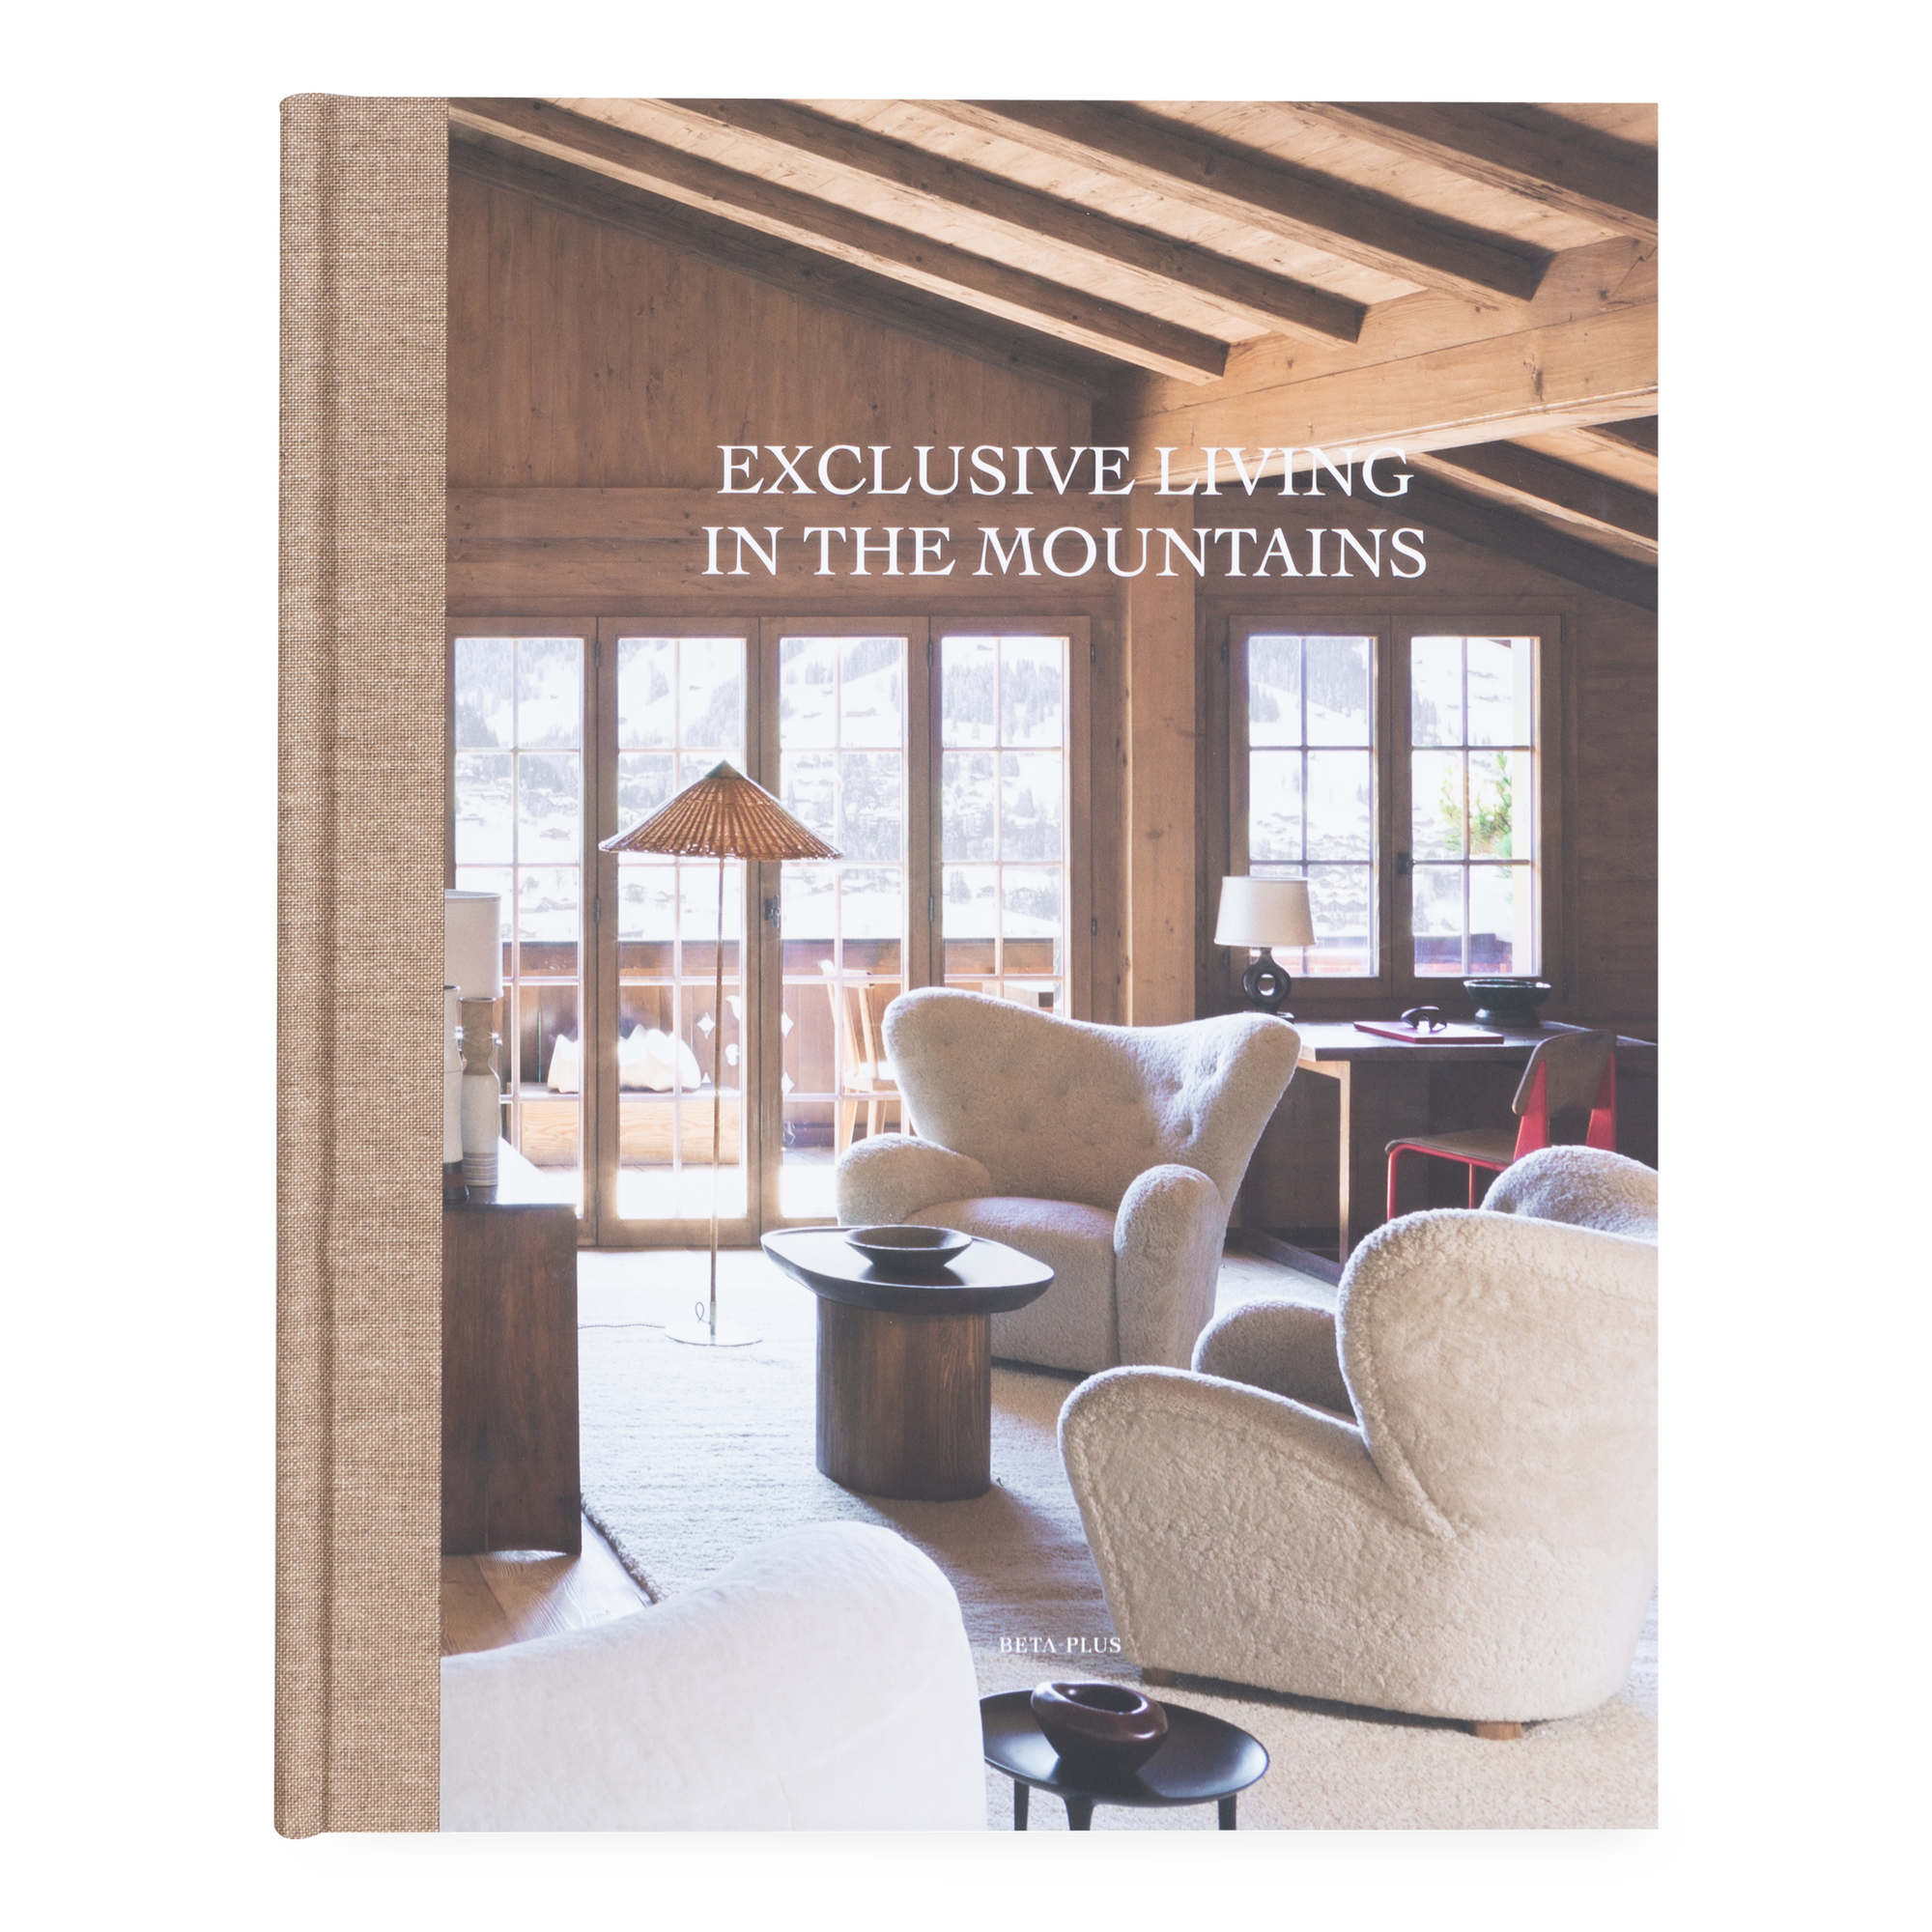 Following on from the successful Modern Mountain Hideaways (2018) and Mountain Retreats (2020), this beautiful coffee table book showcases 17 new mountain chalets from all over Eur